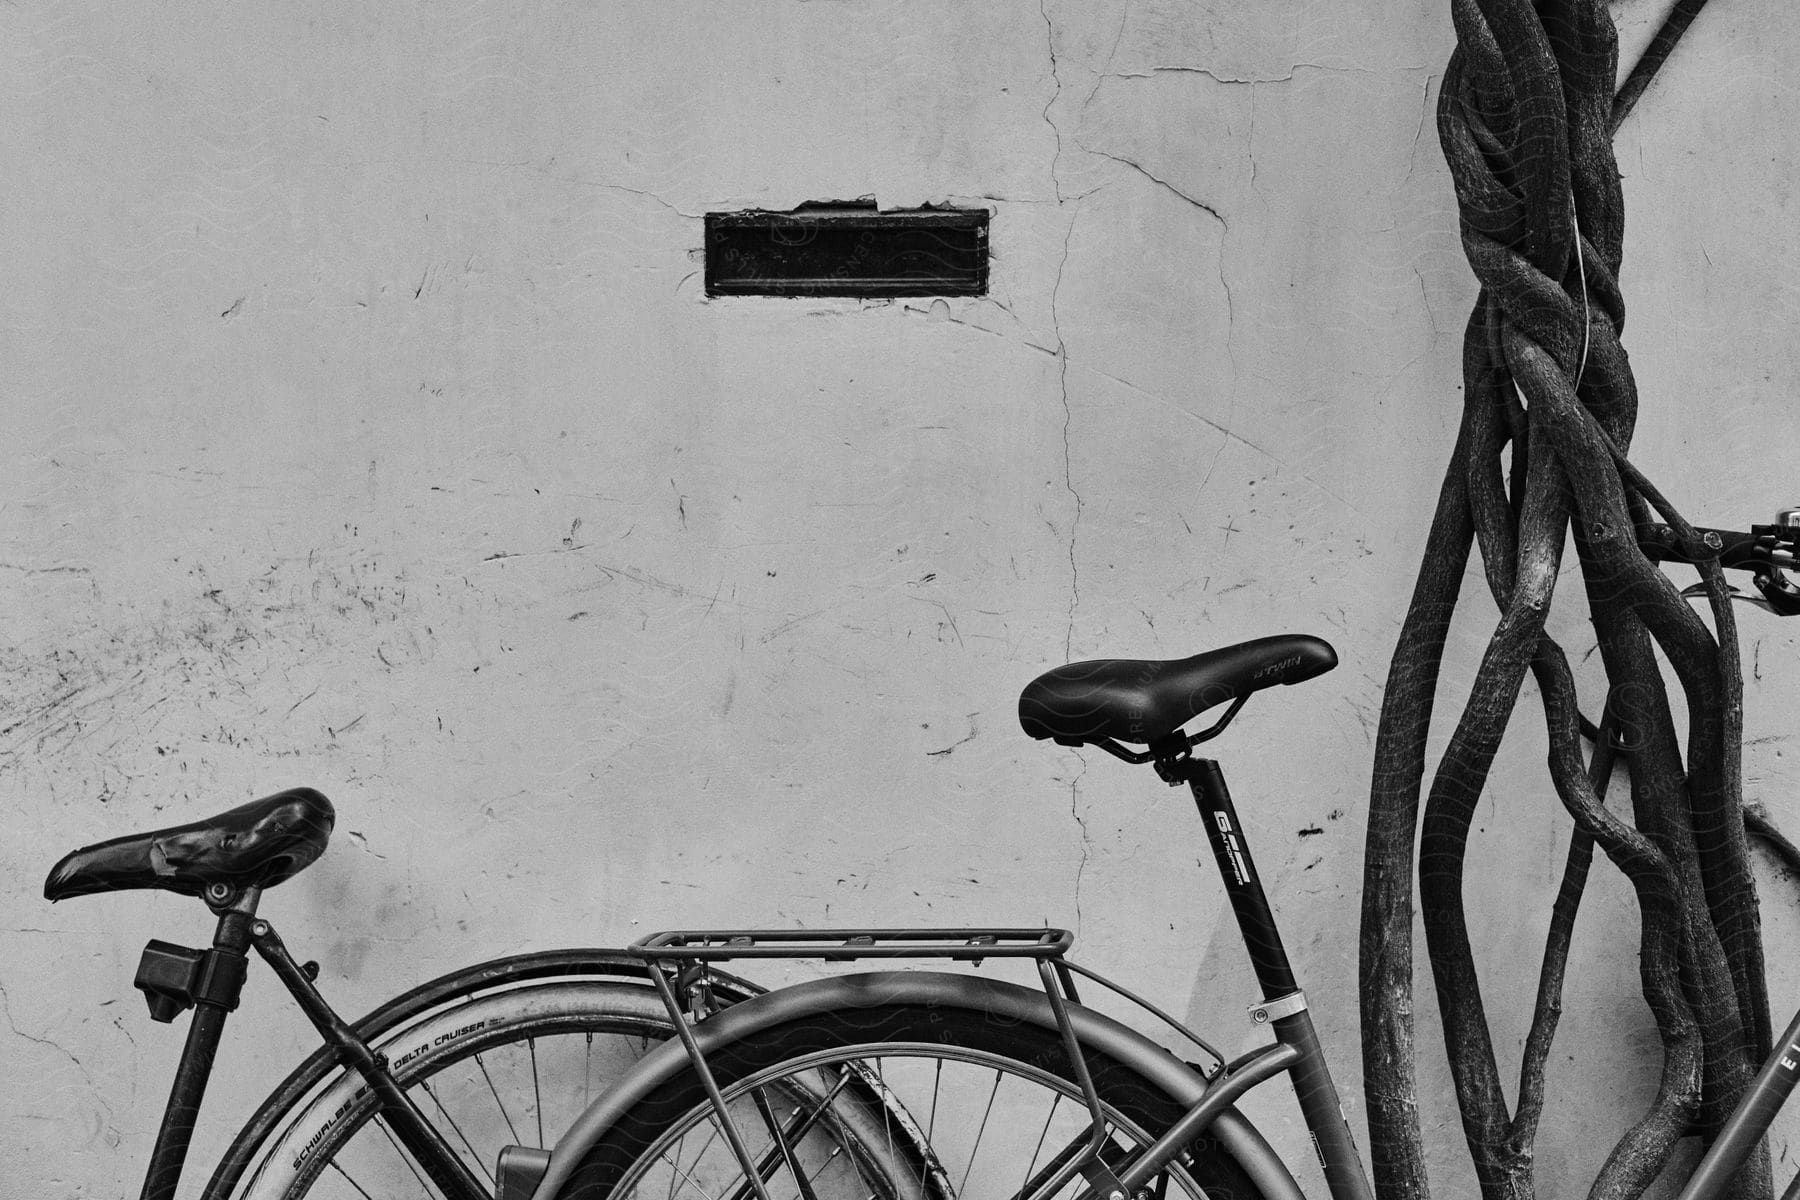 Two bicycles lean against wall near drop off slot.